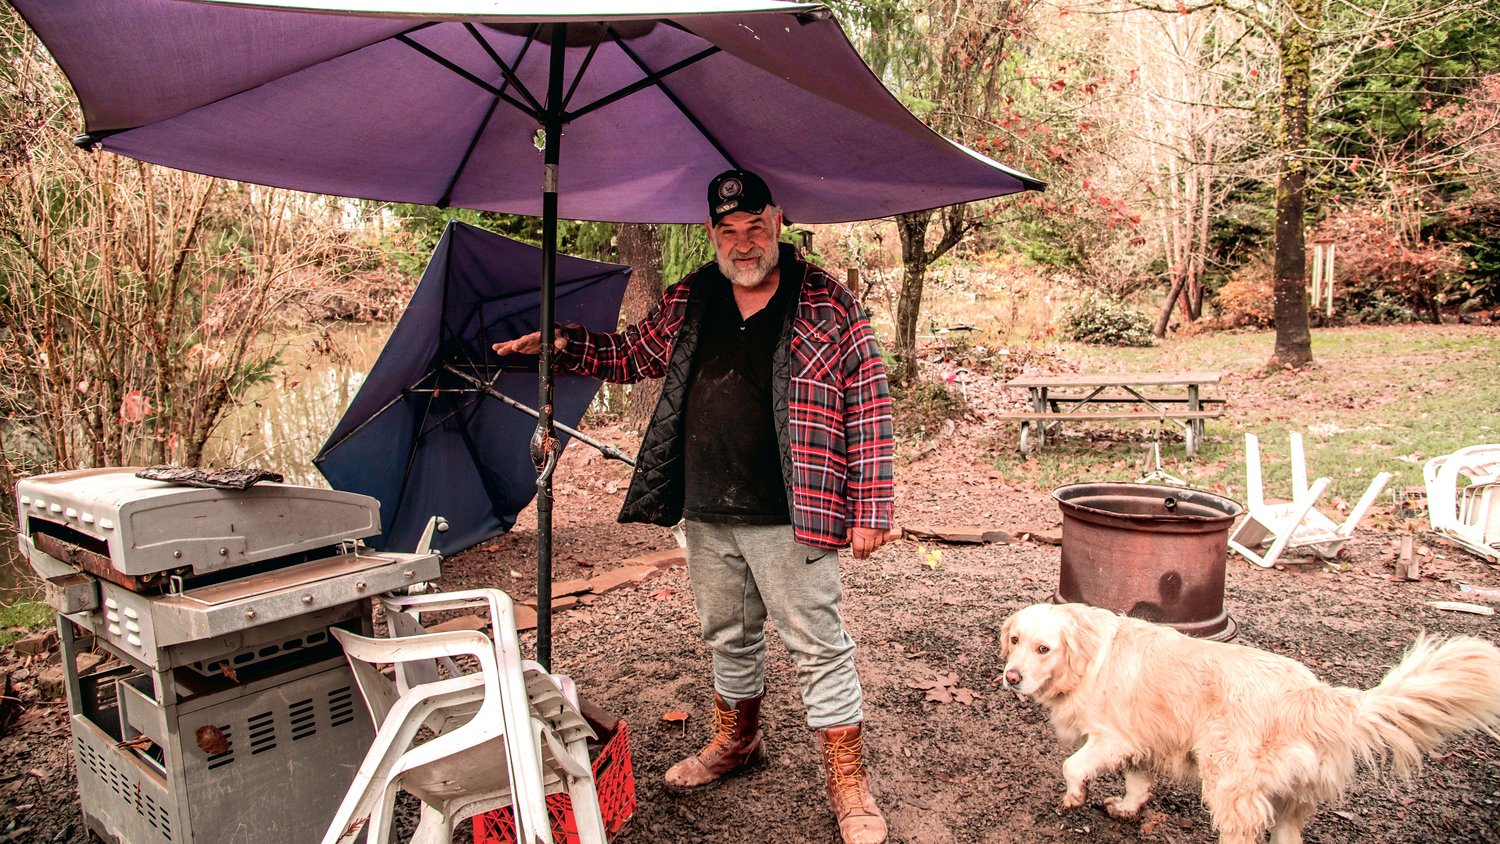 David Richter points out the height water rose to, on the pole of an umbrella near the river, during flooding in Randle while standing next to his dog Bear Saturday morning.